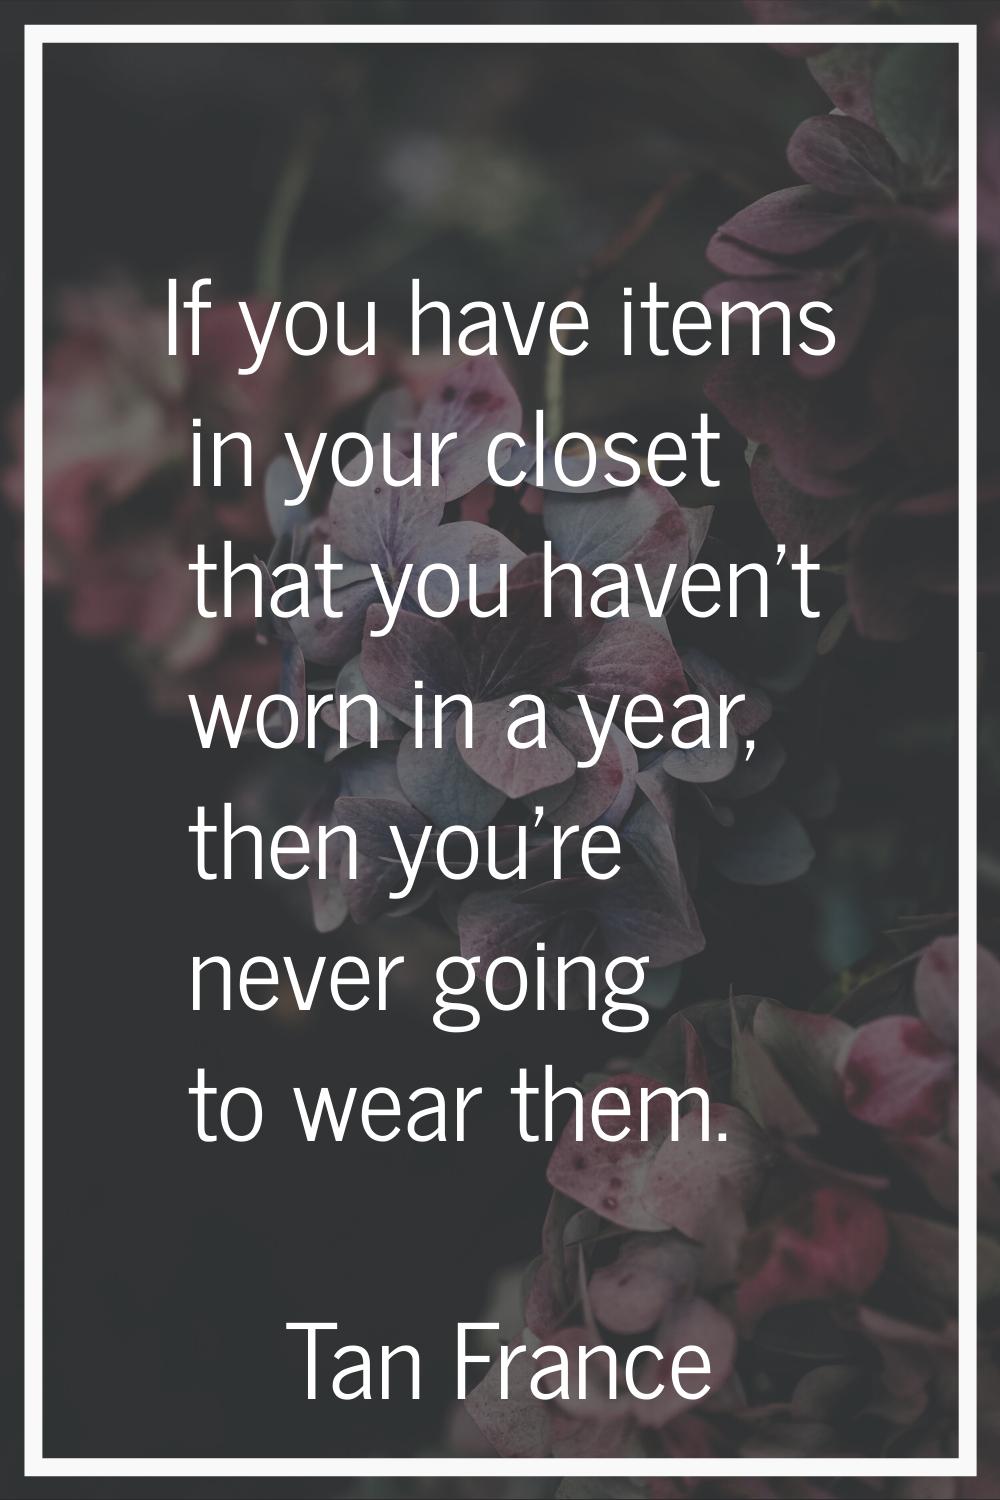 If you have items in your closet that you haven't worn in a year, then you're never going to wear t